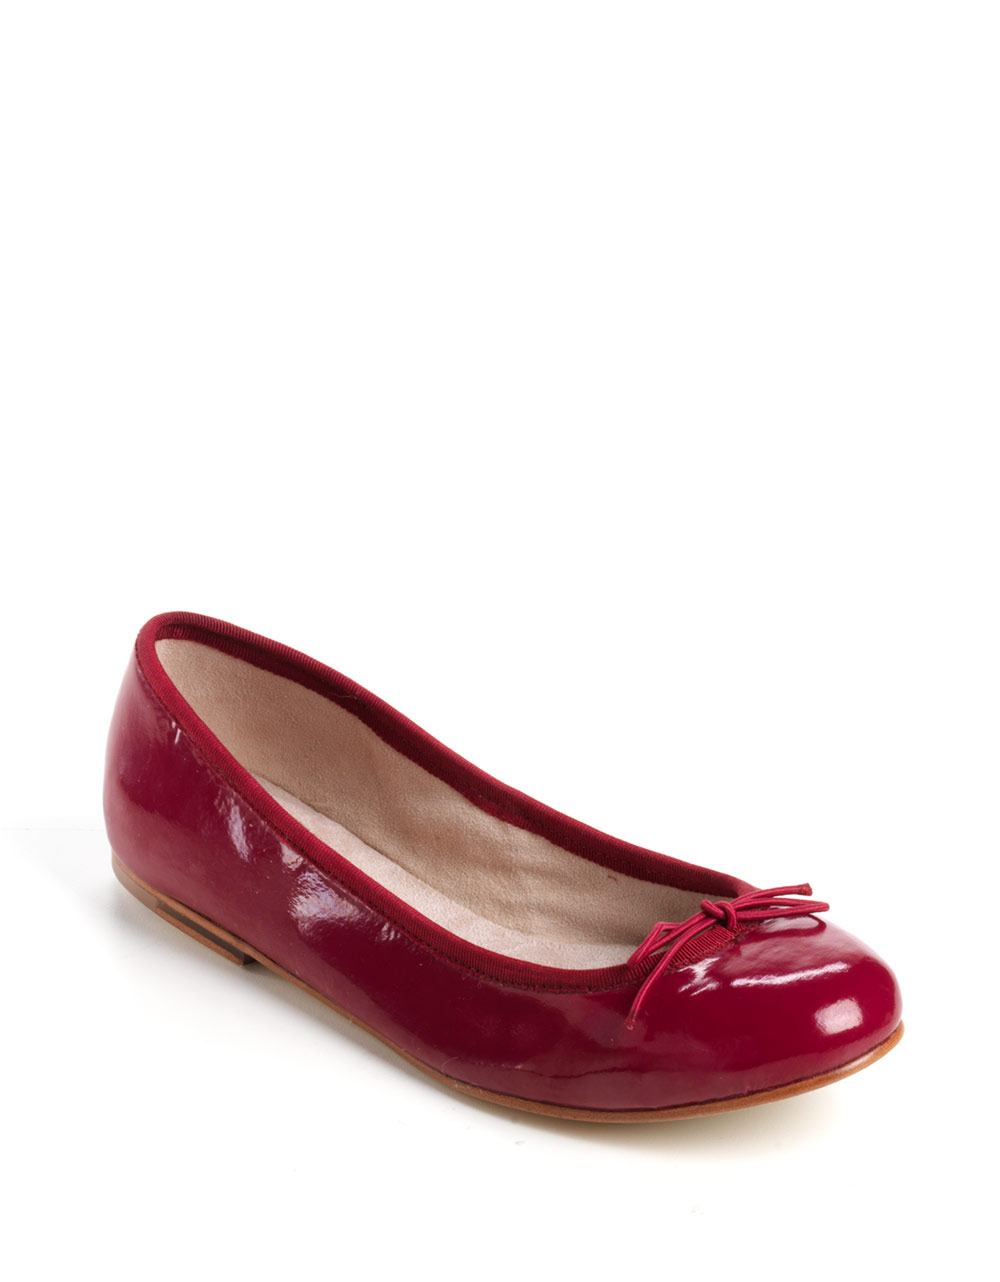 Bloch Patent Leather Ballet Flats in Red (raspberry patent) | Lyst